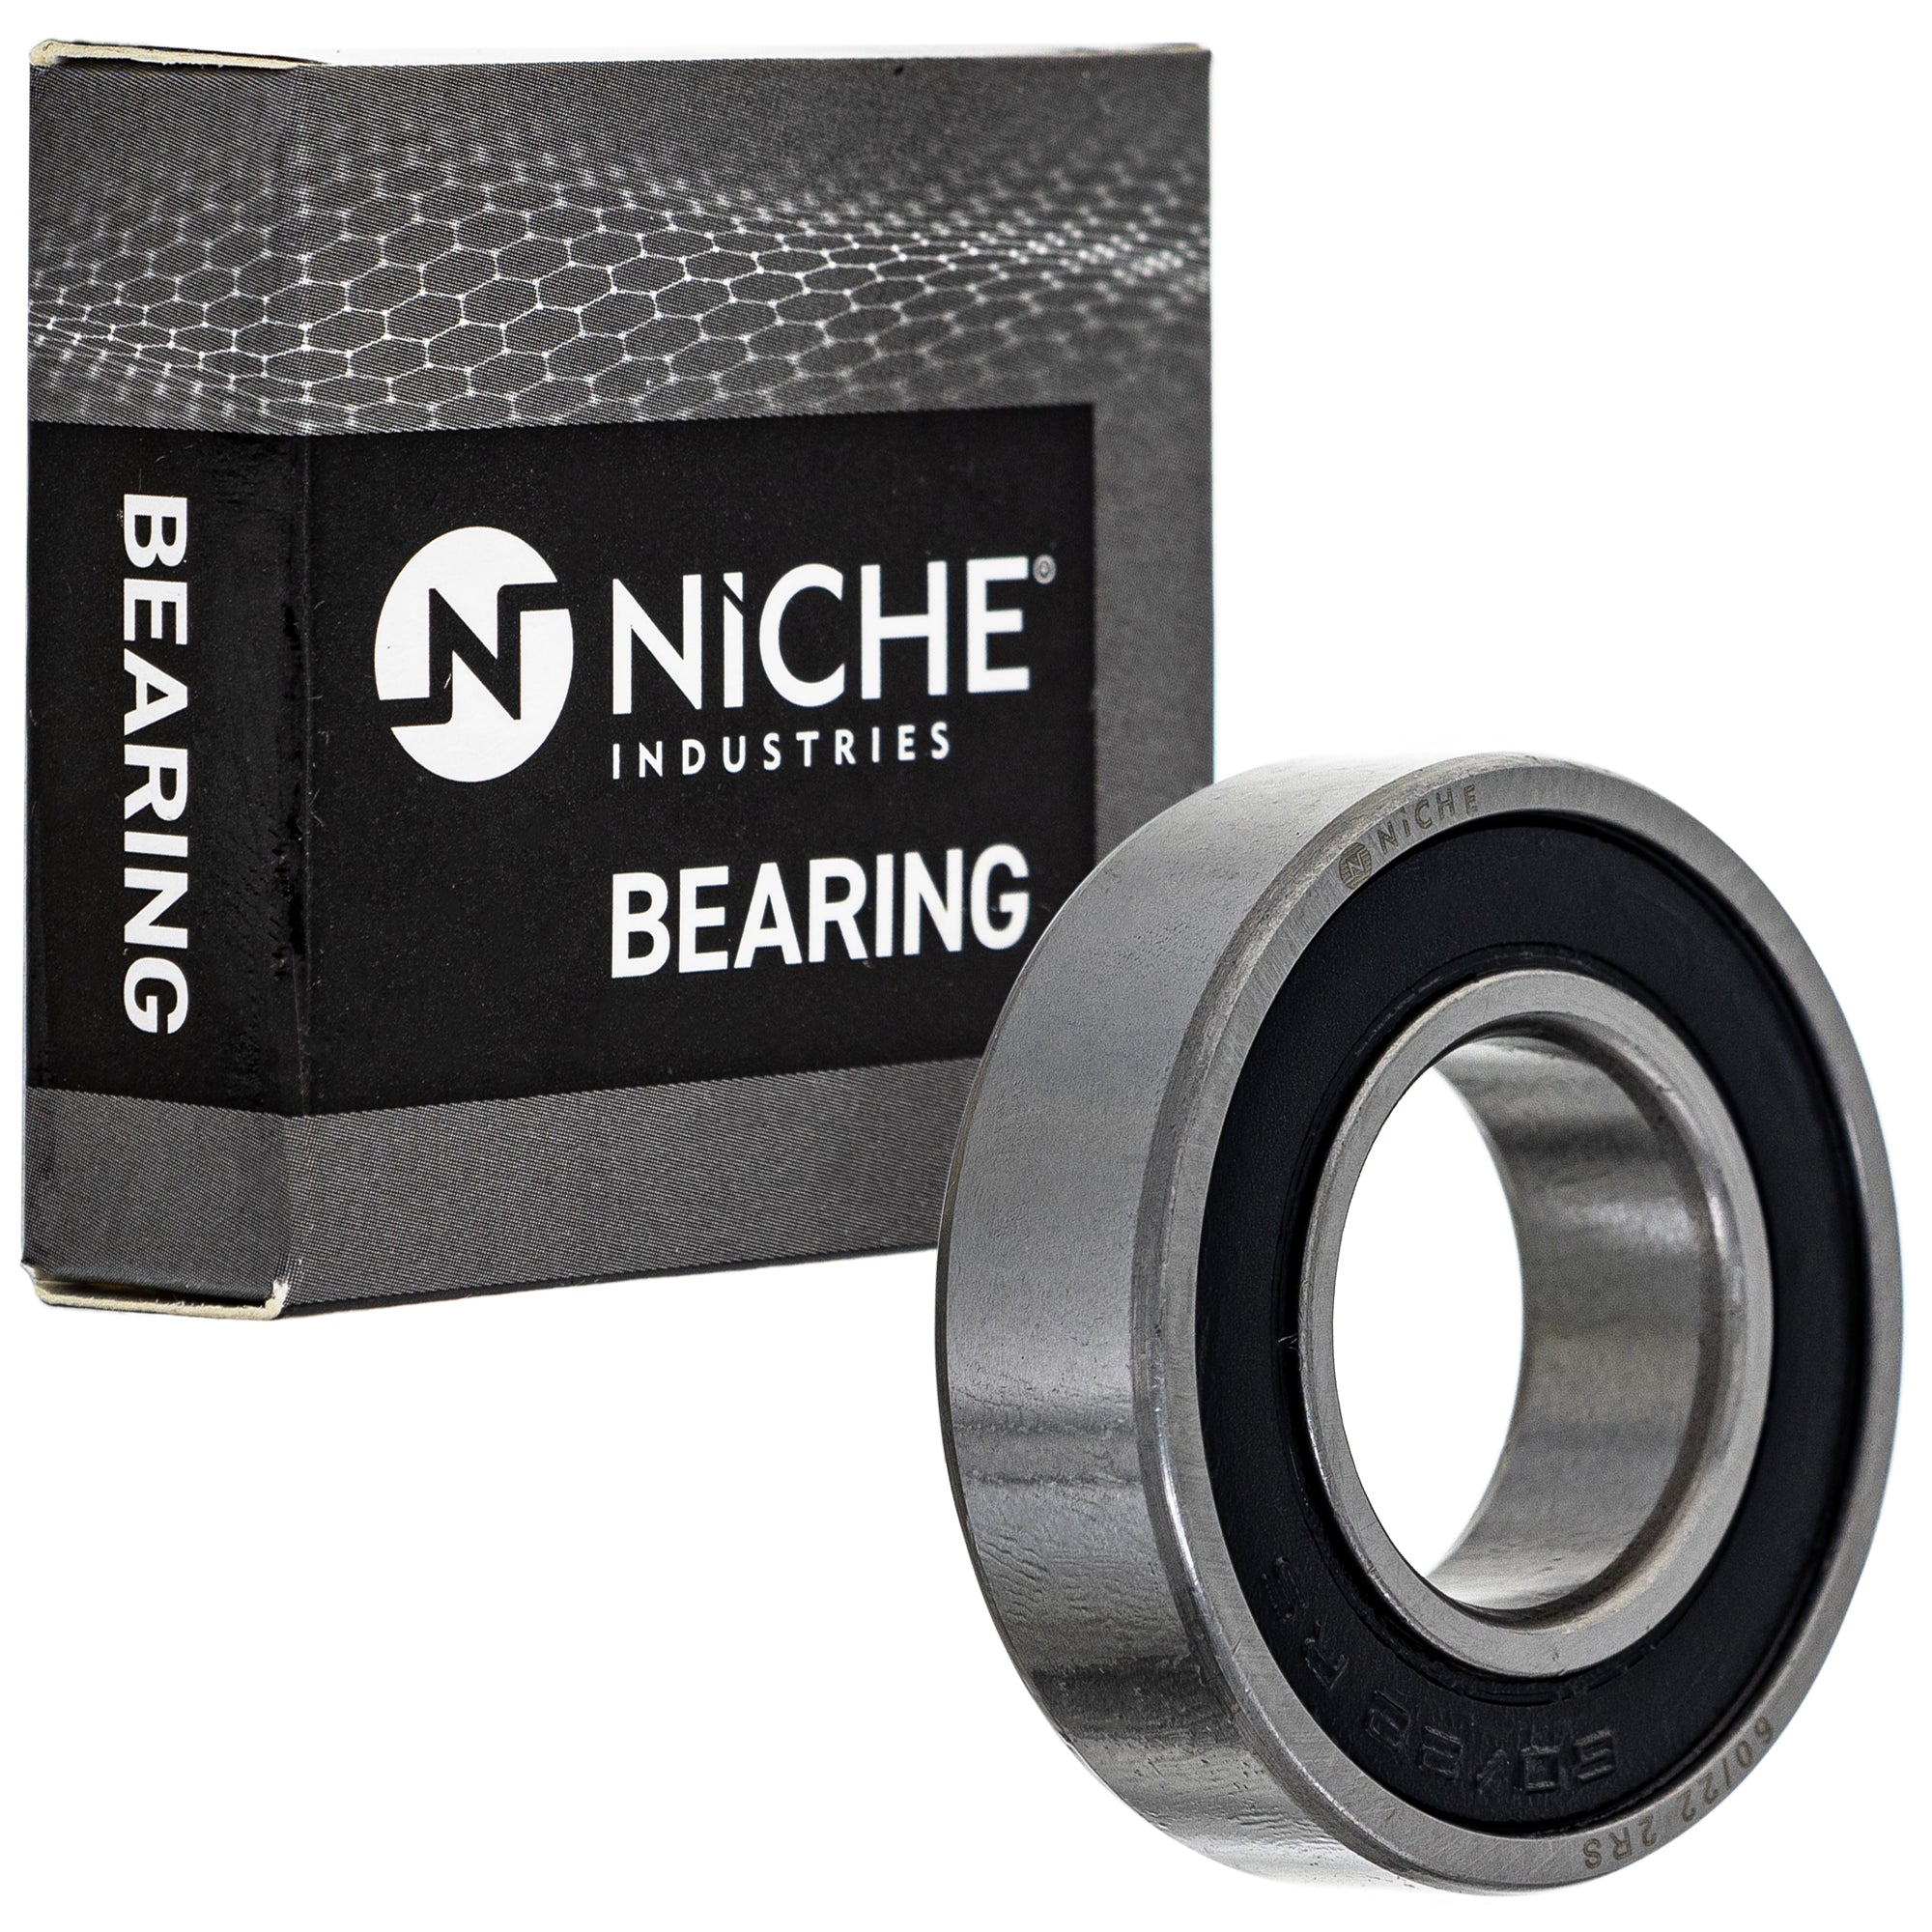 NICHE 519-CBB2267R Bearing & Seal Kit 10-Pack for zOTHER TRX700XX